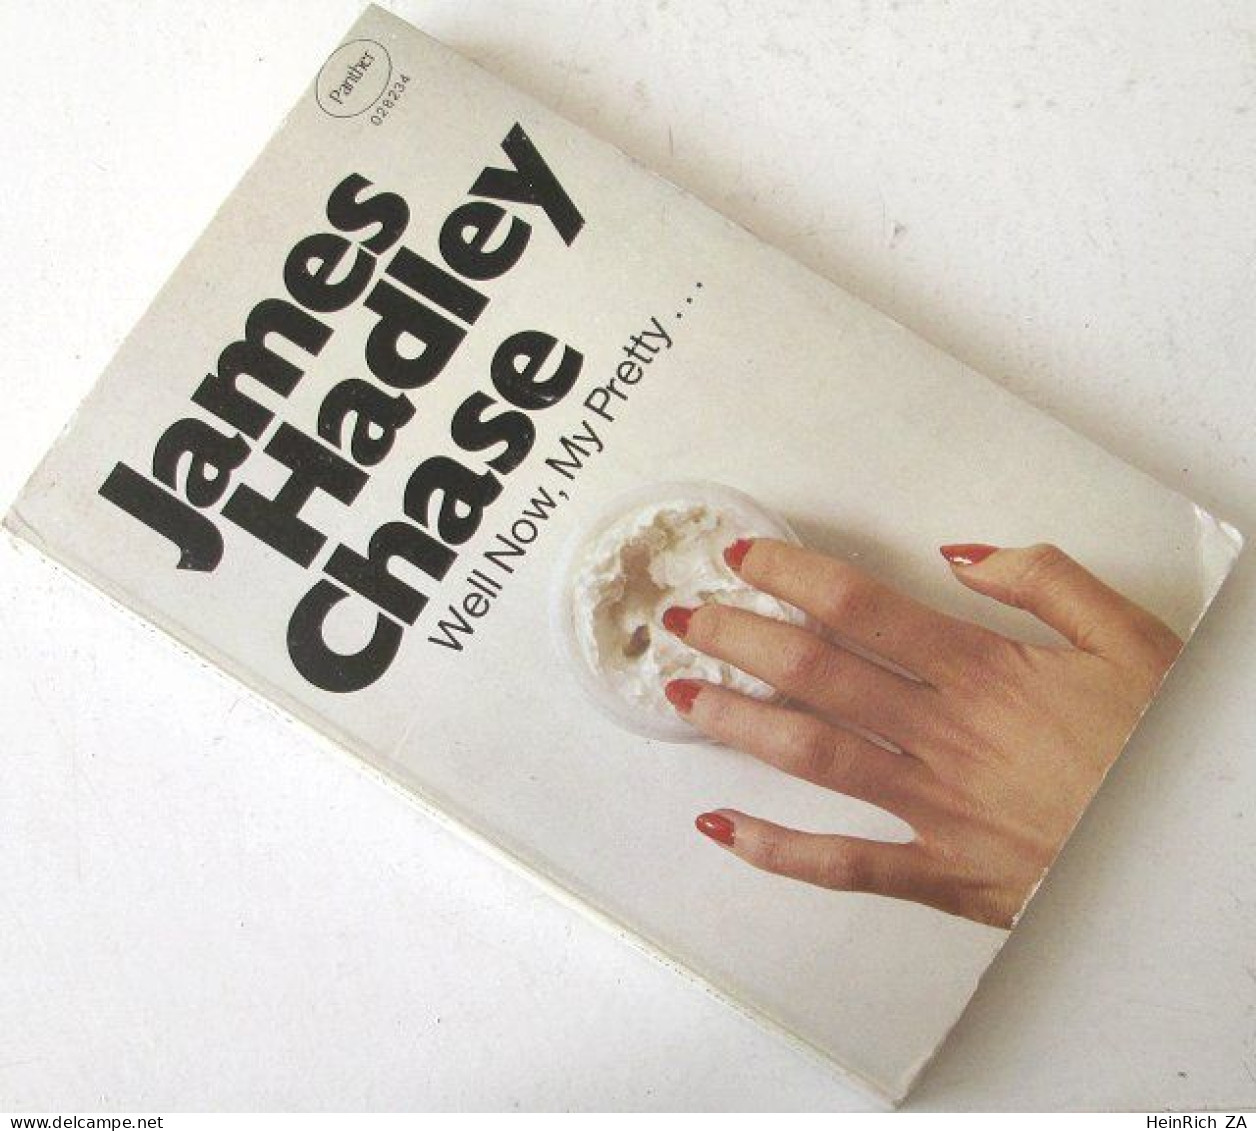 James Hadley Chase - Well Now My Pretty... - Crimes Véritables